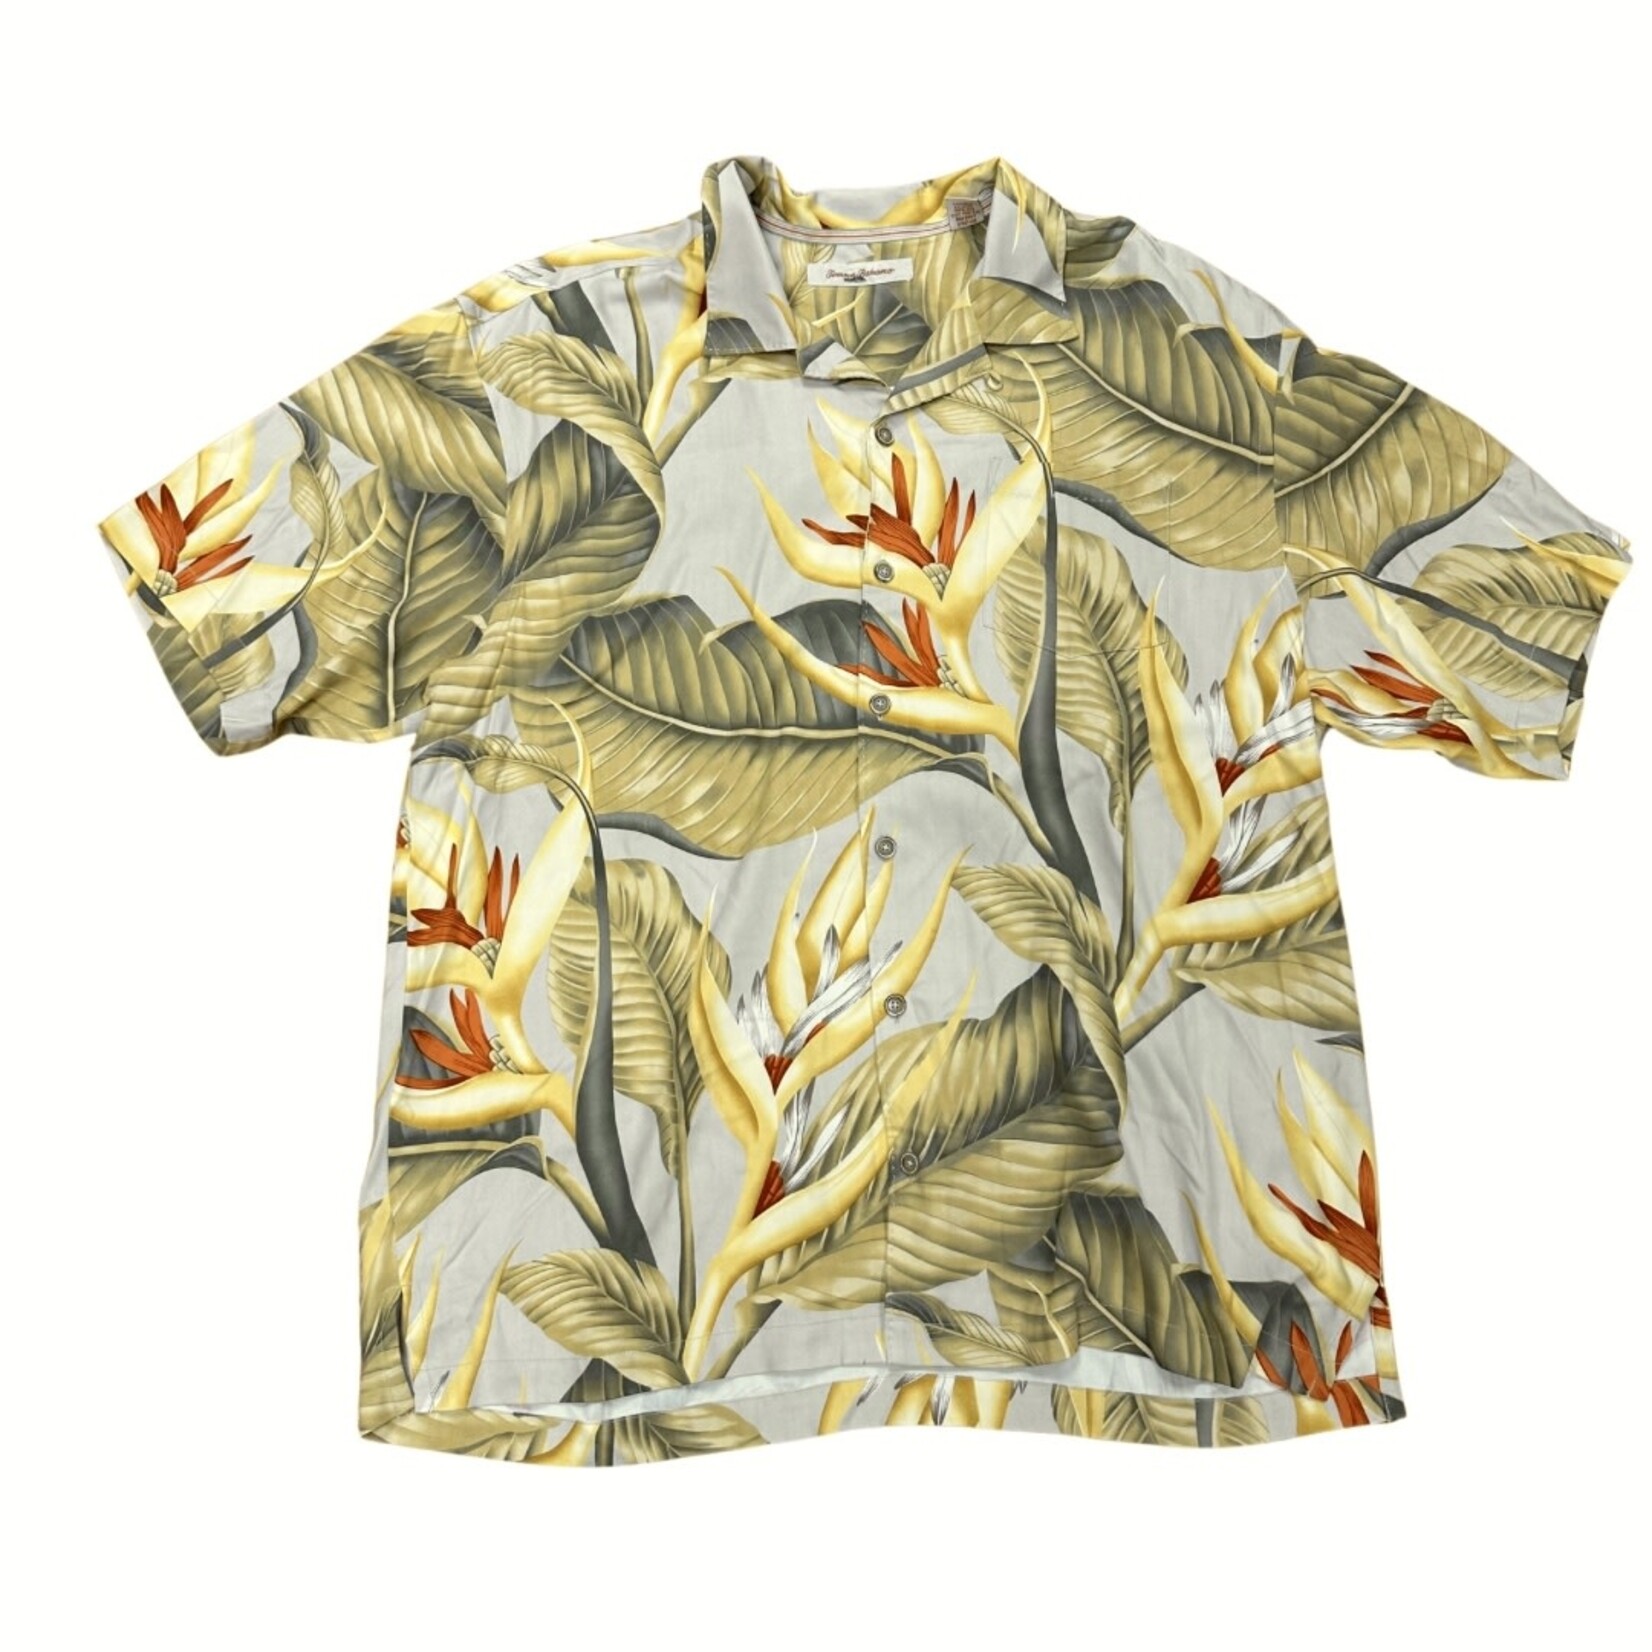 Mission Zero Men’s Reloved Aloha Shirt - XL Tall - Tommy Bahama- 100% Silk Heliconia